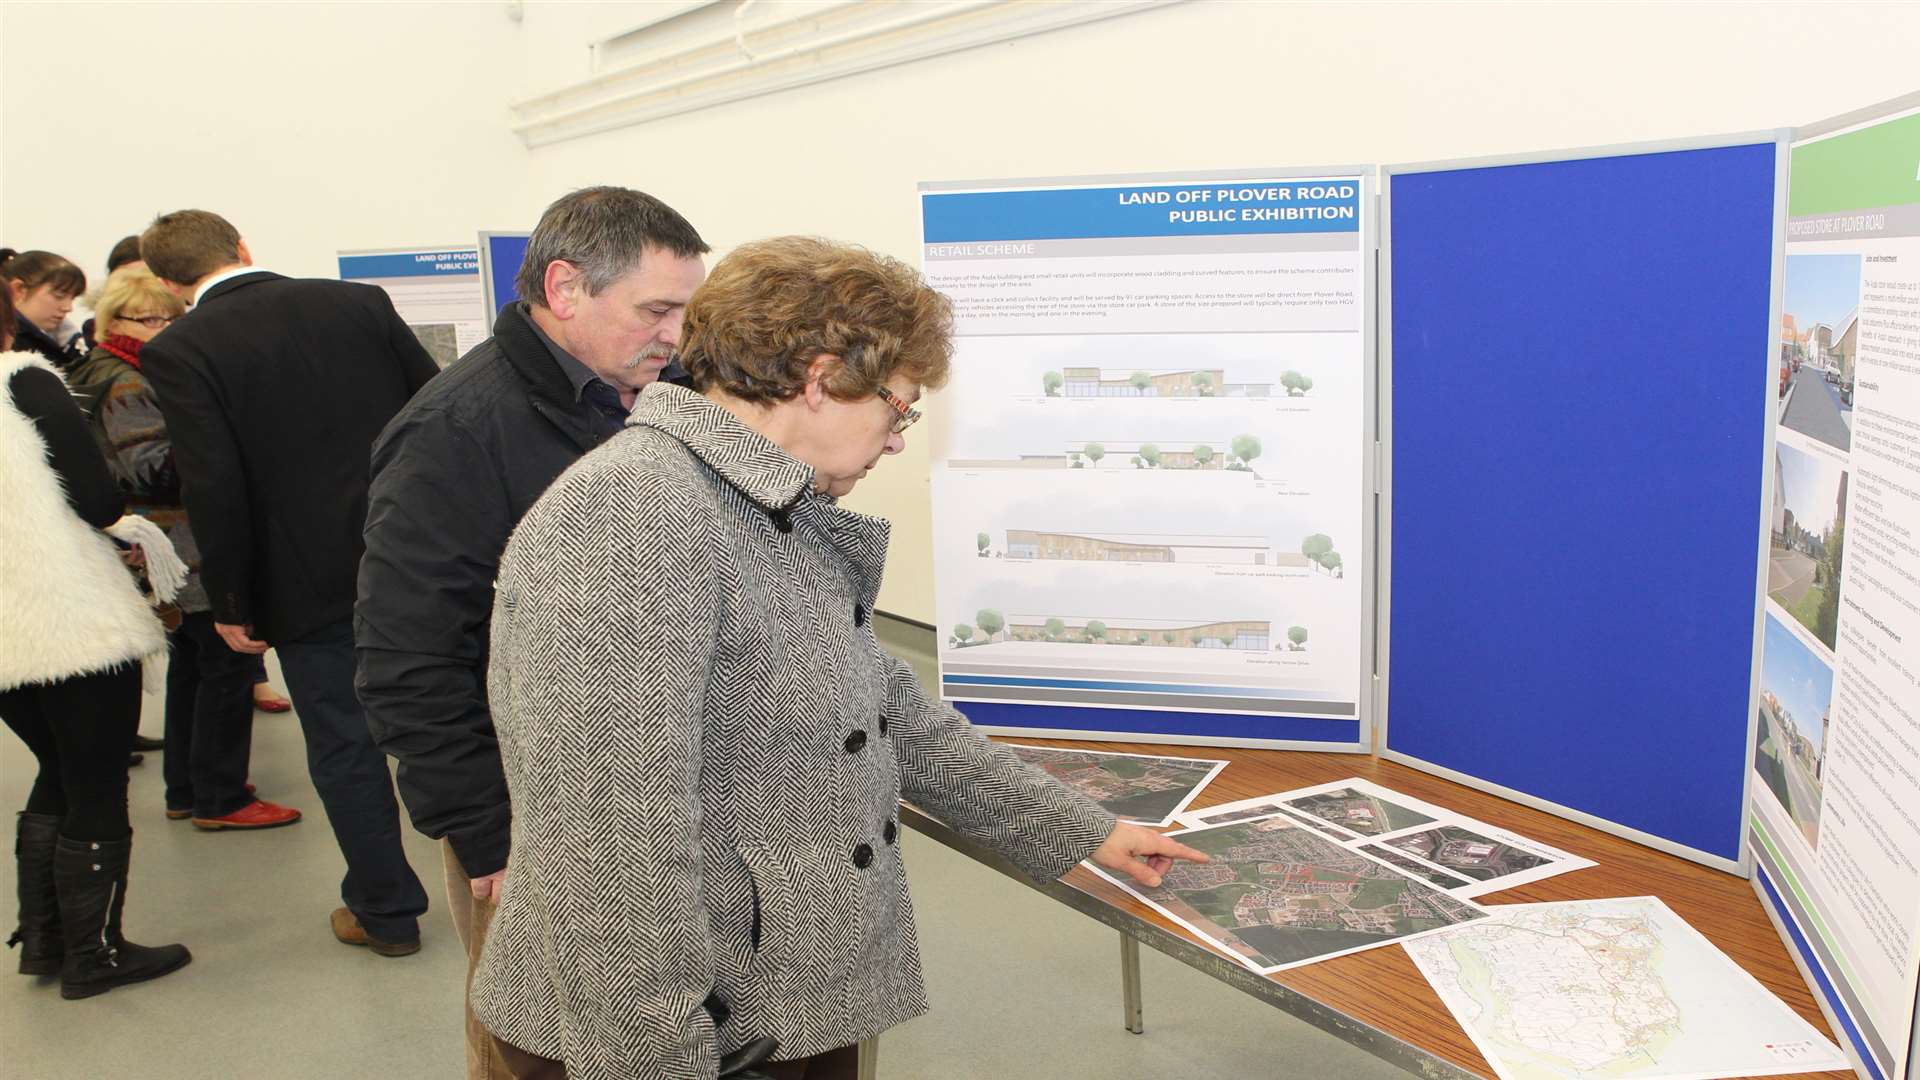 Members of the public view boards showing details of the project